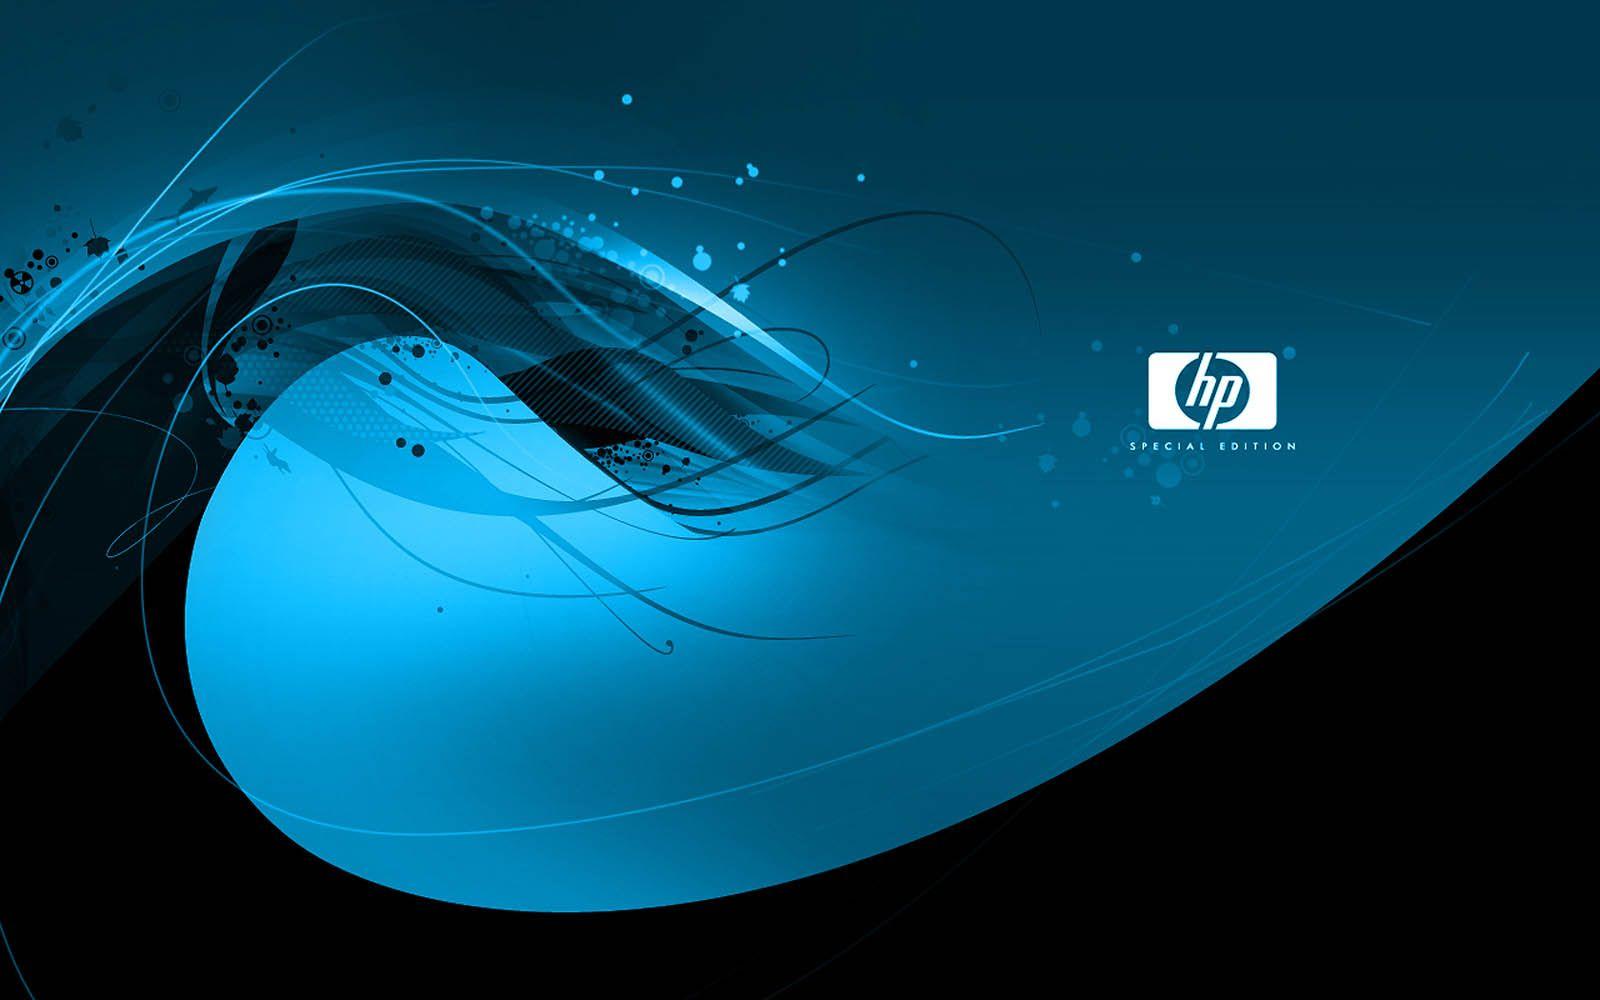 Hp Laptop Wallpapers Top Free Hp Laptop Backgrounds Wallpaperaccess